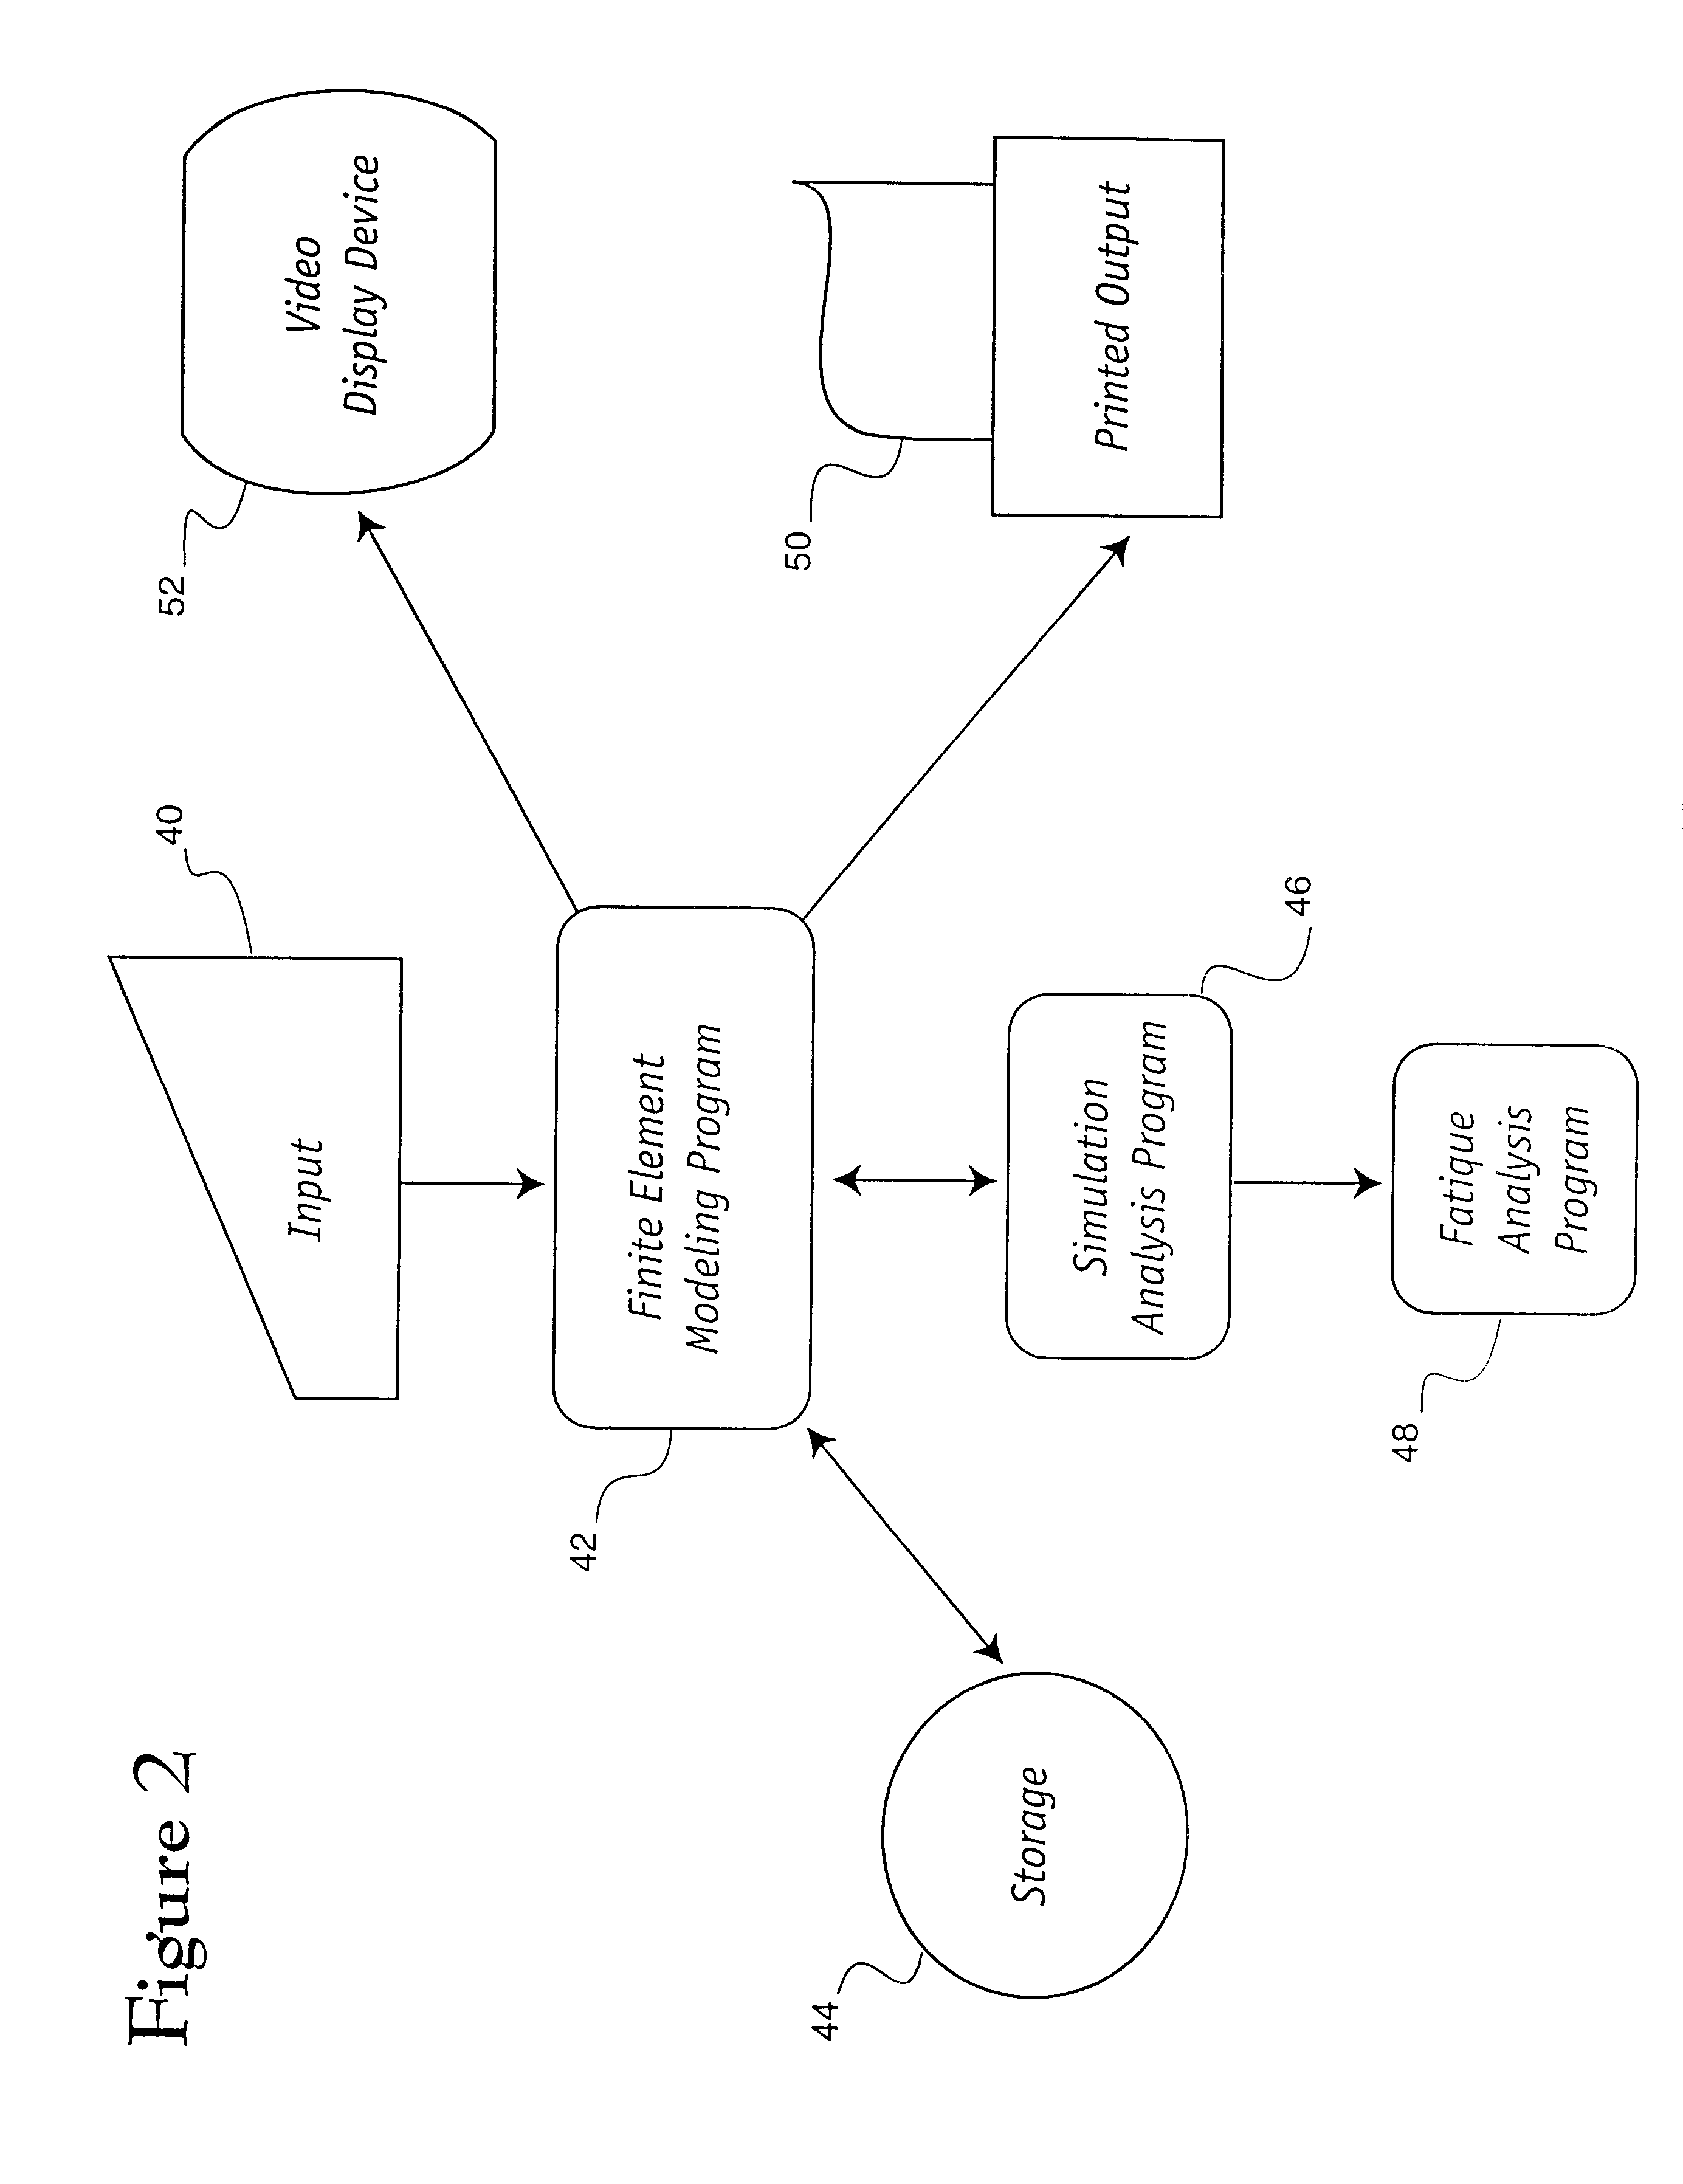 Method and system for simulating vehicle and roadway interaction